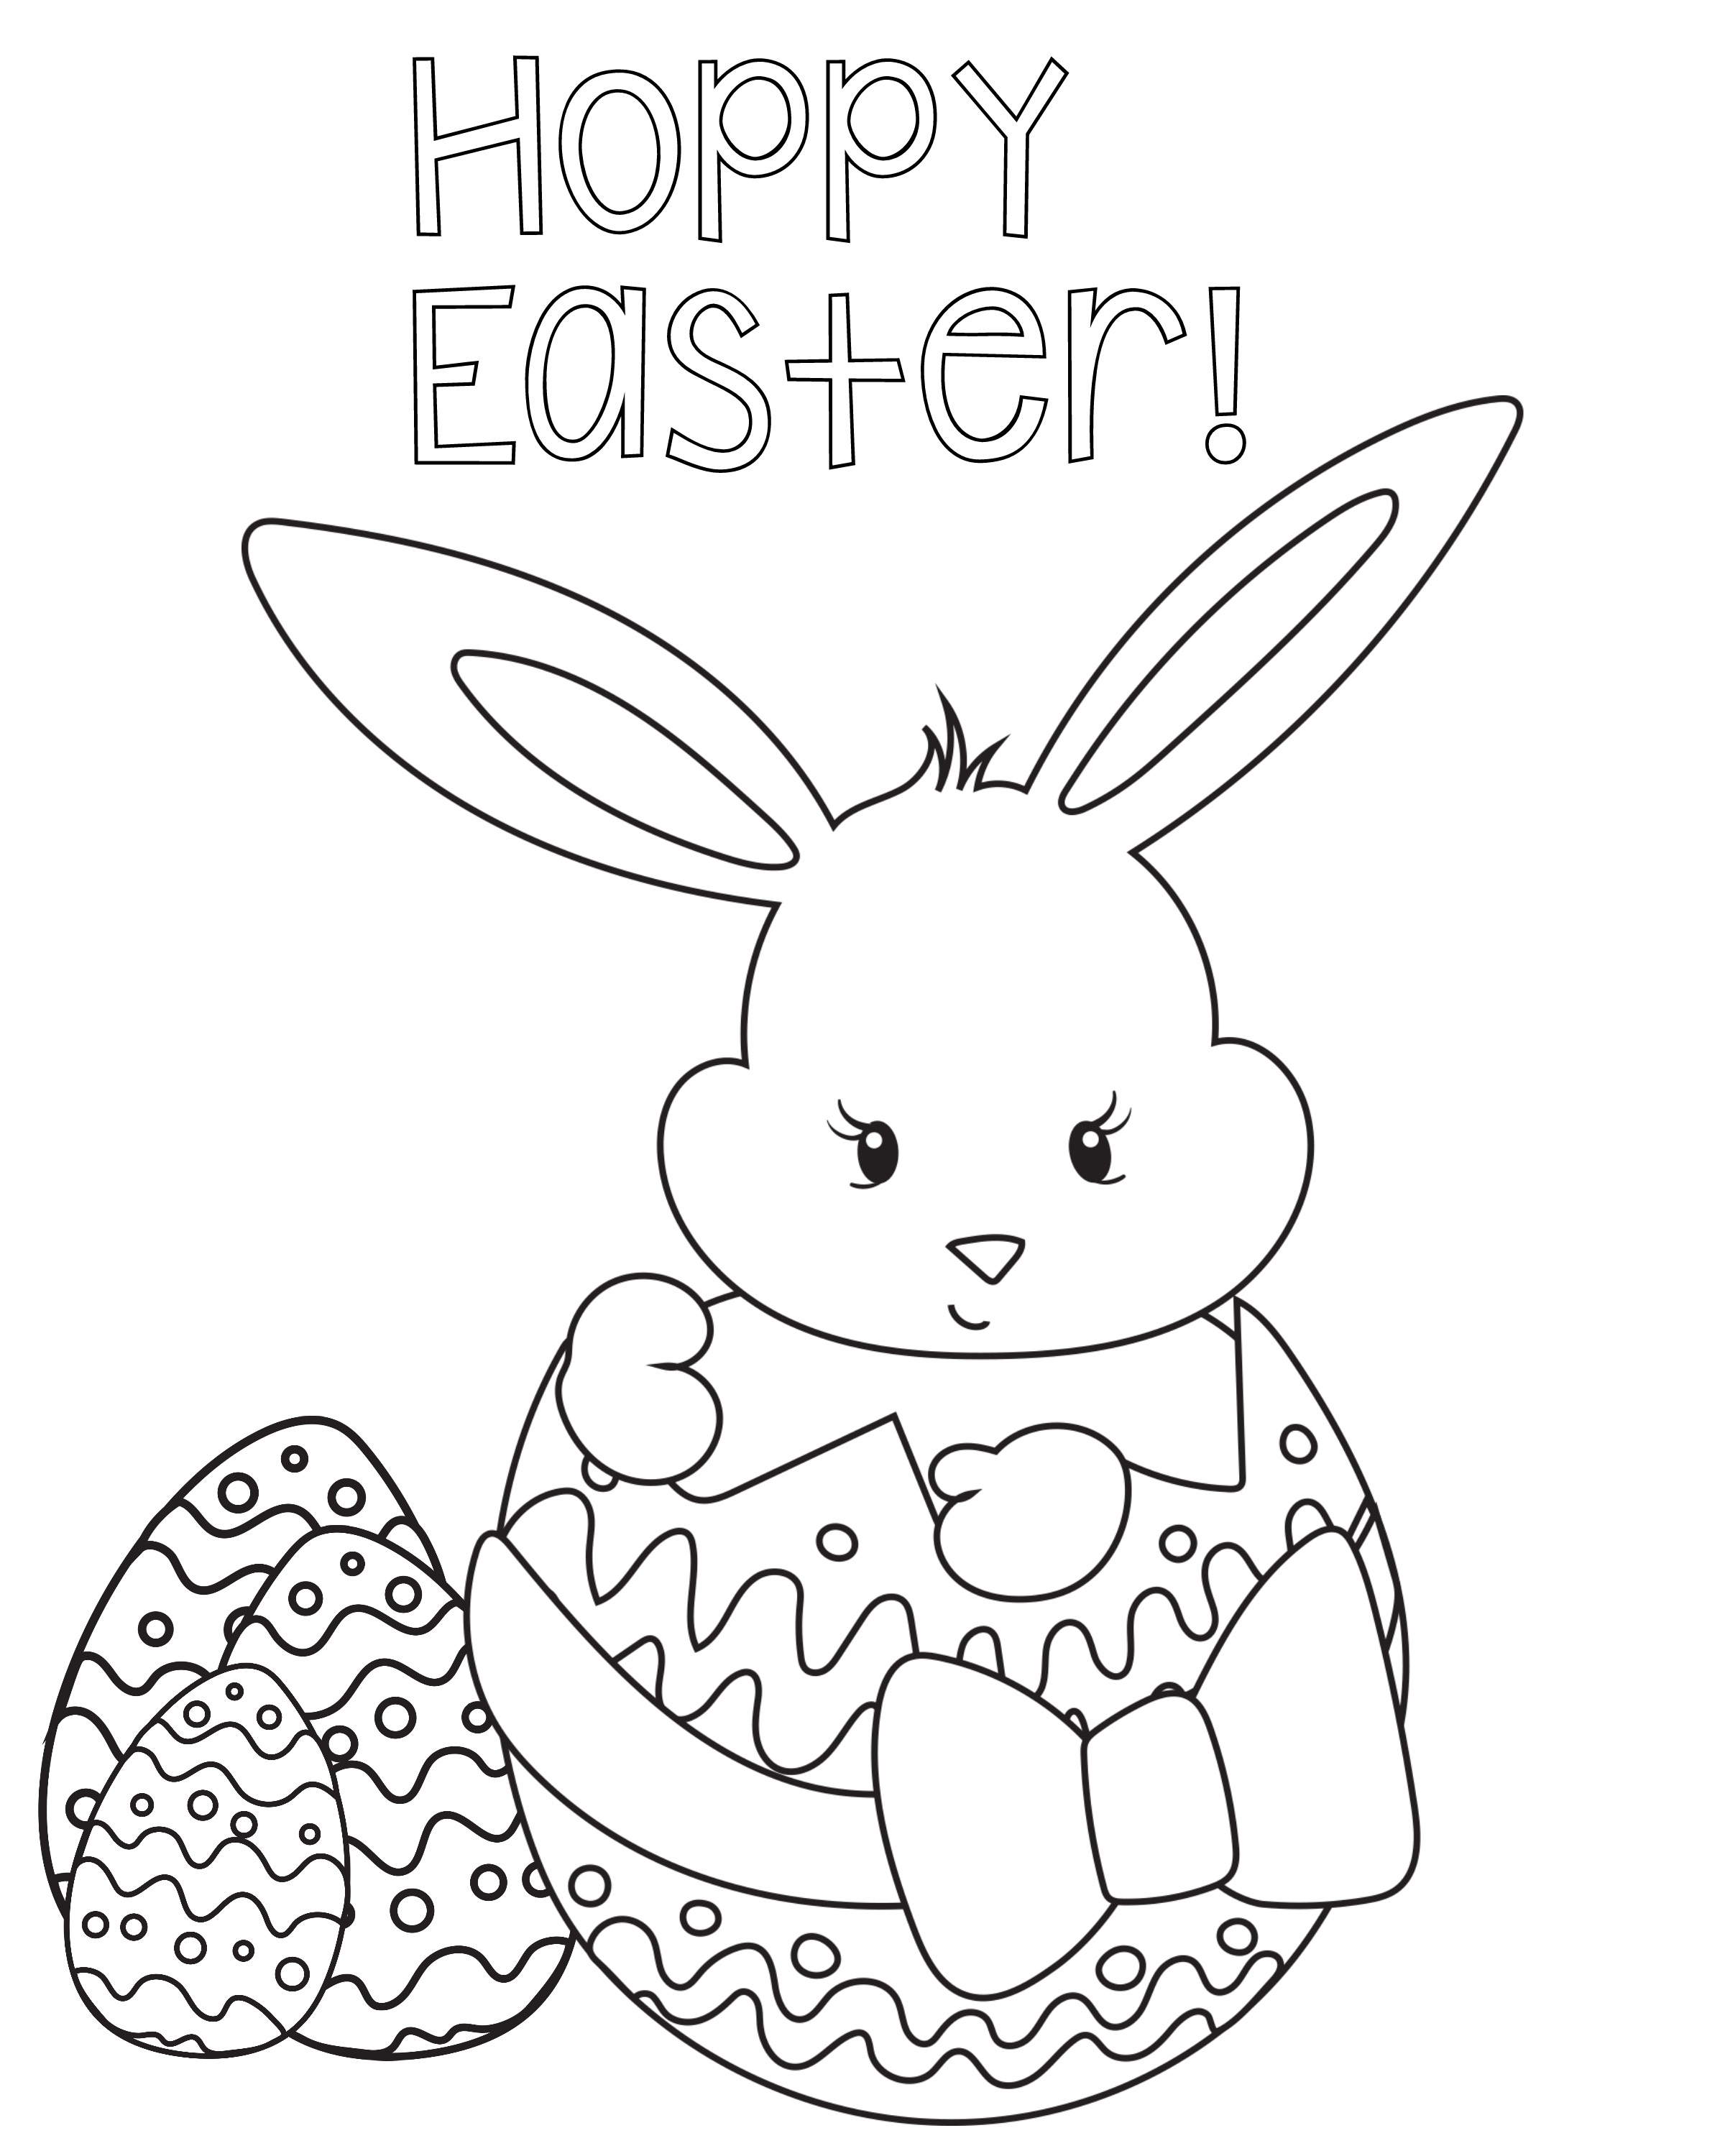 Easter Coloring Pages For Kids - Crazy Little Projects - Easter Coloring Pages Free Printable